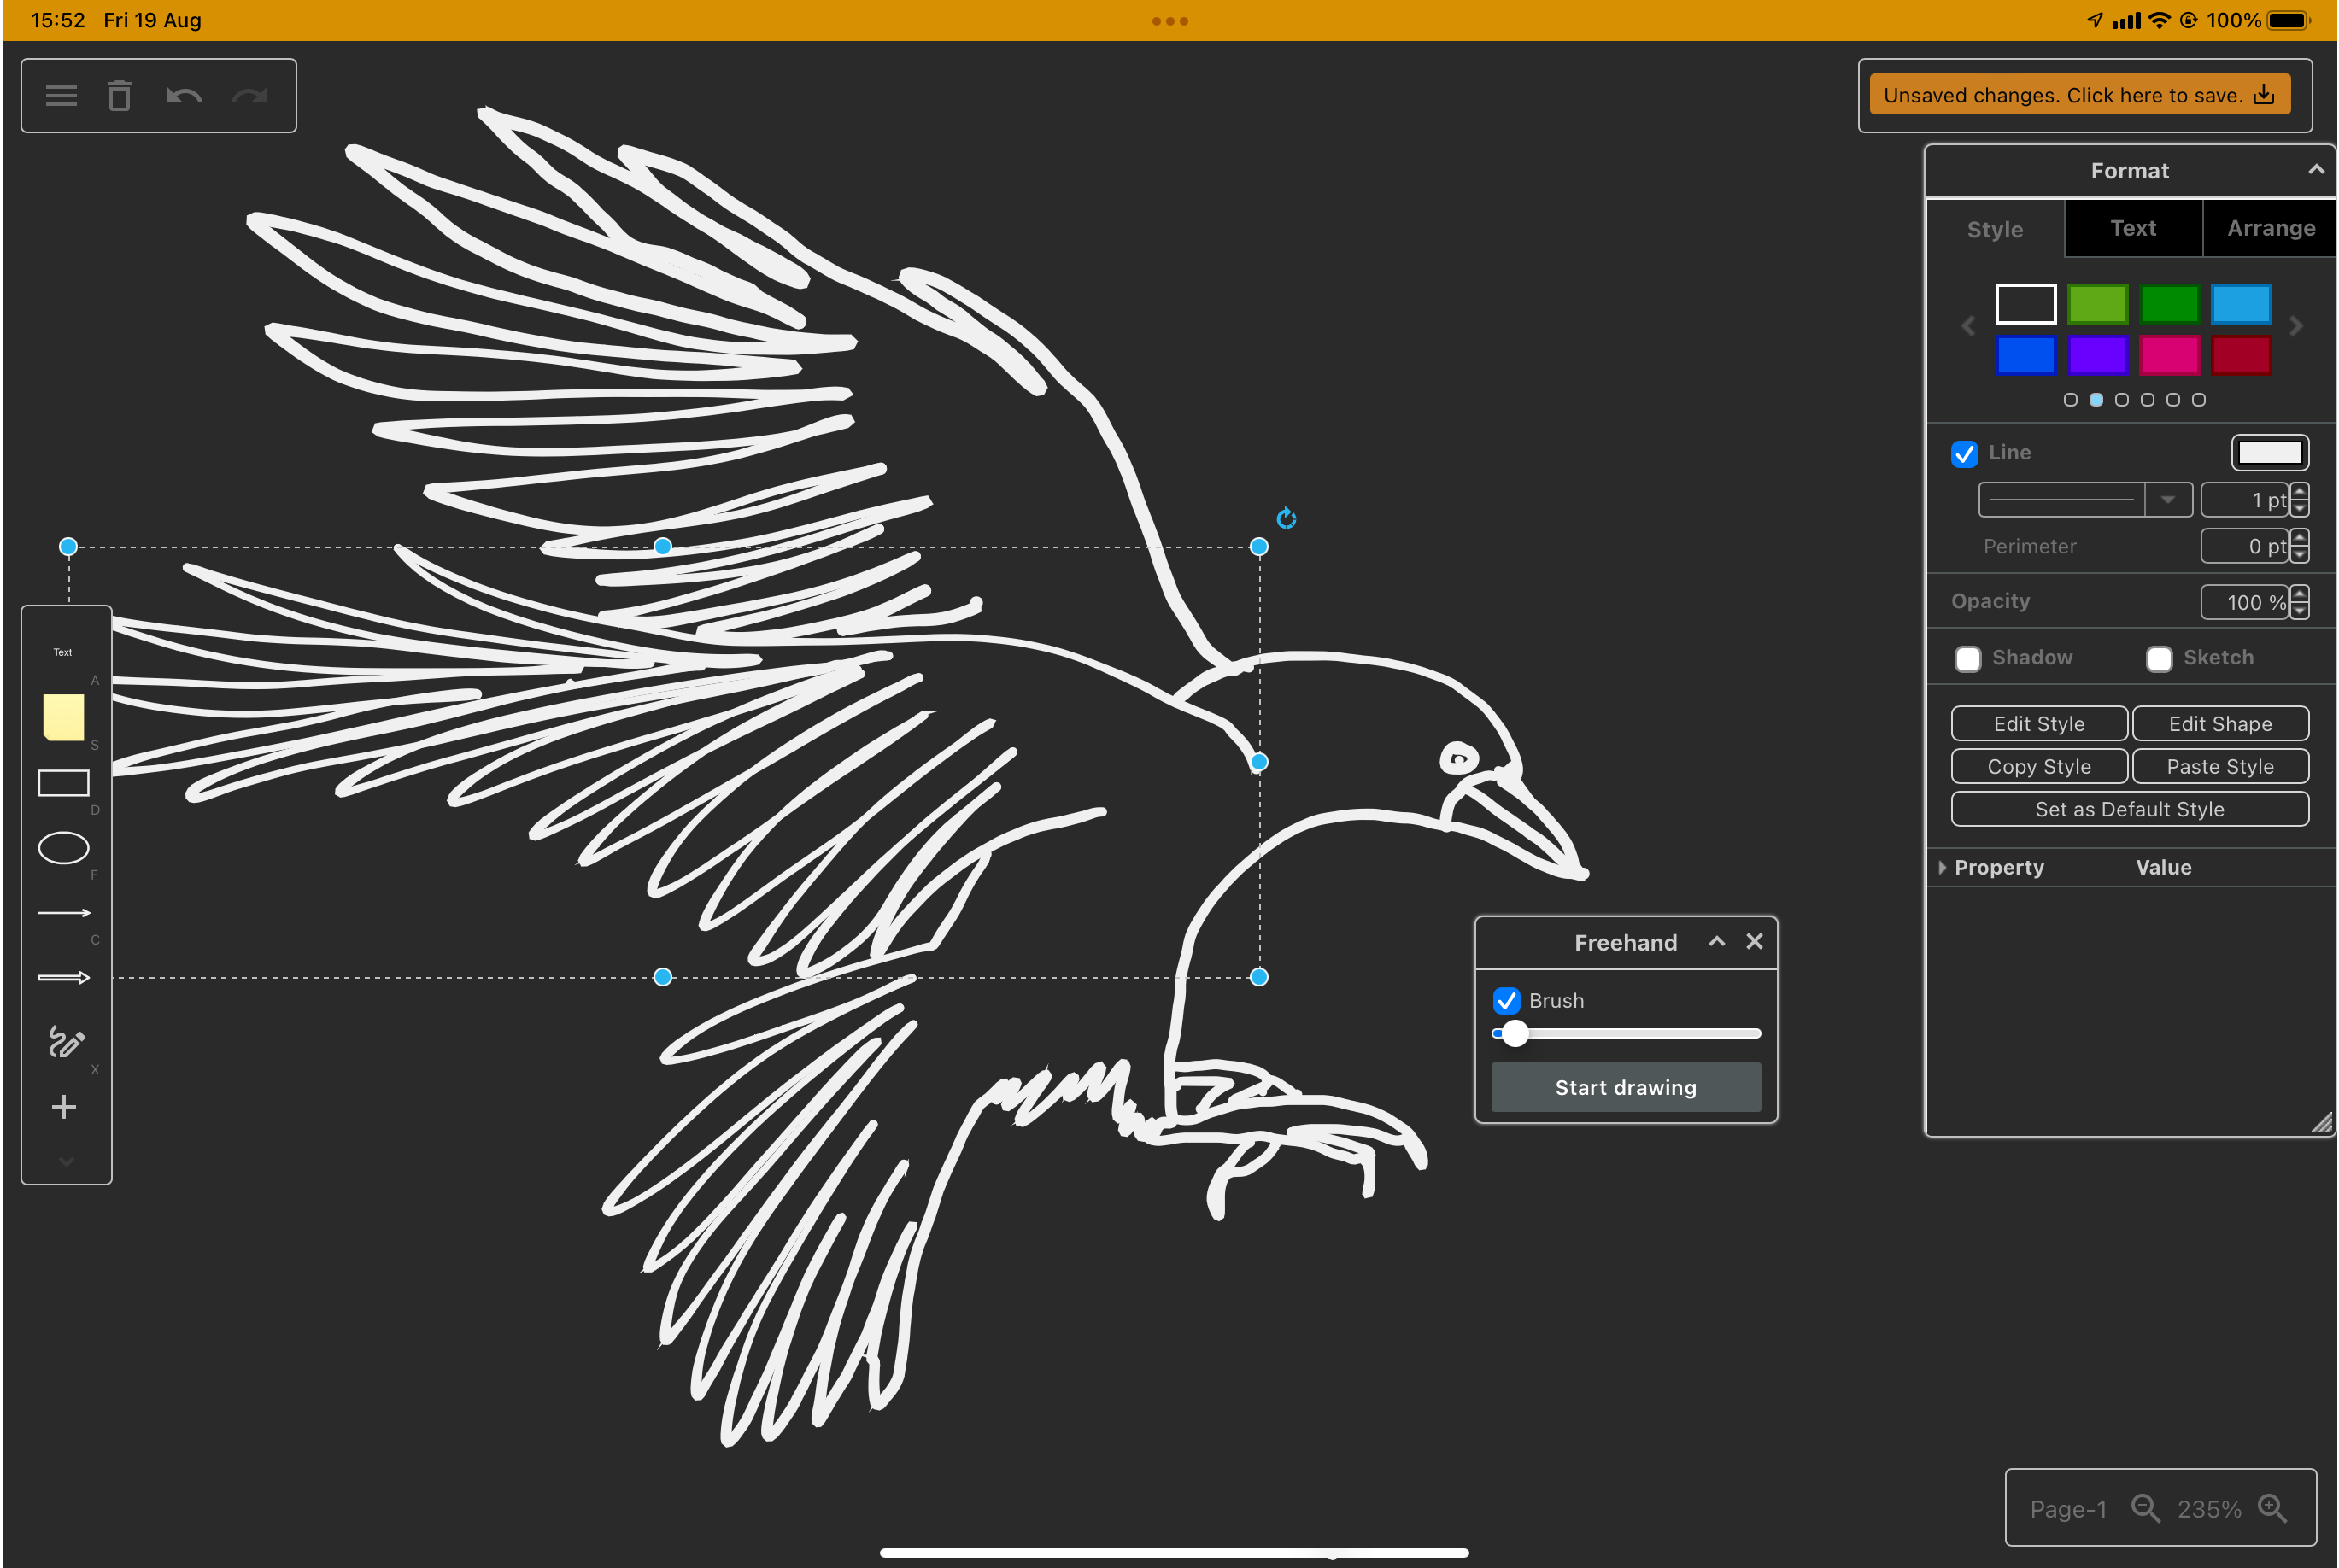 Freehand drawing in draw.io on a tablet - click the freehand tool in the toolbar on the left